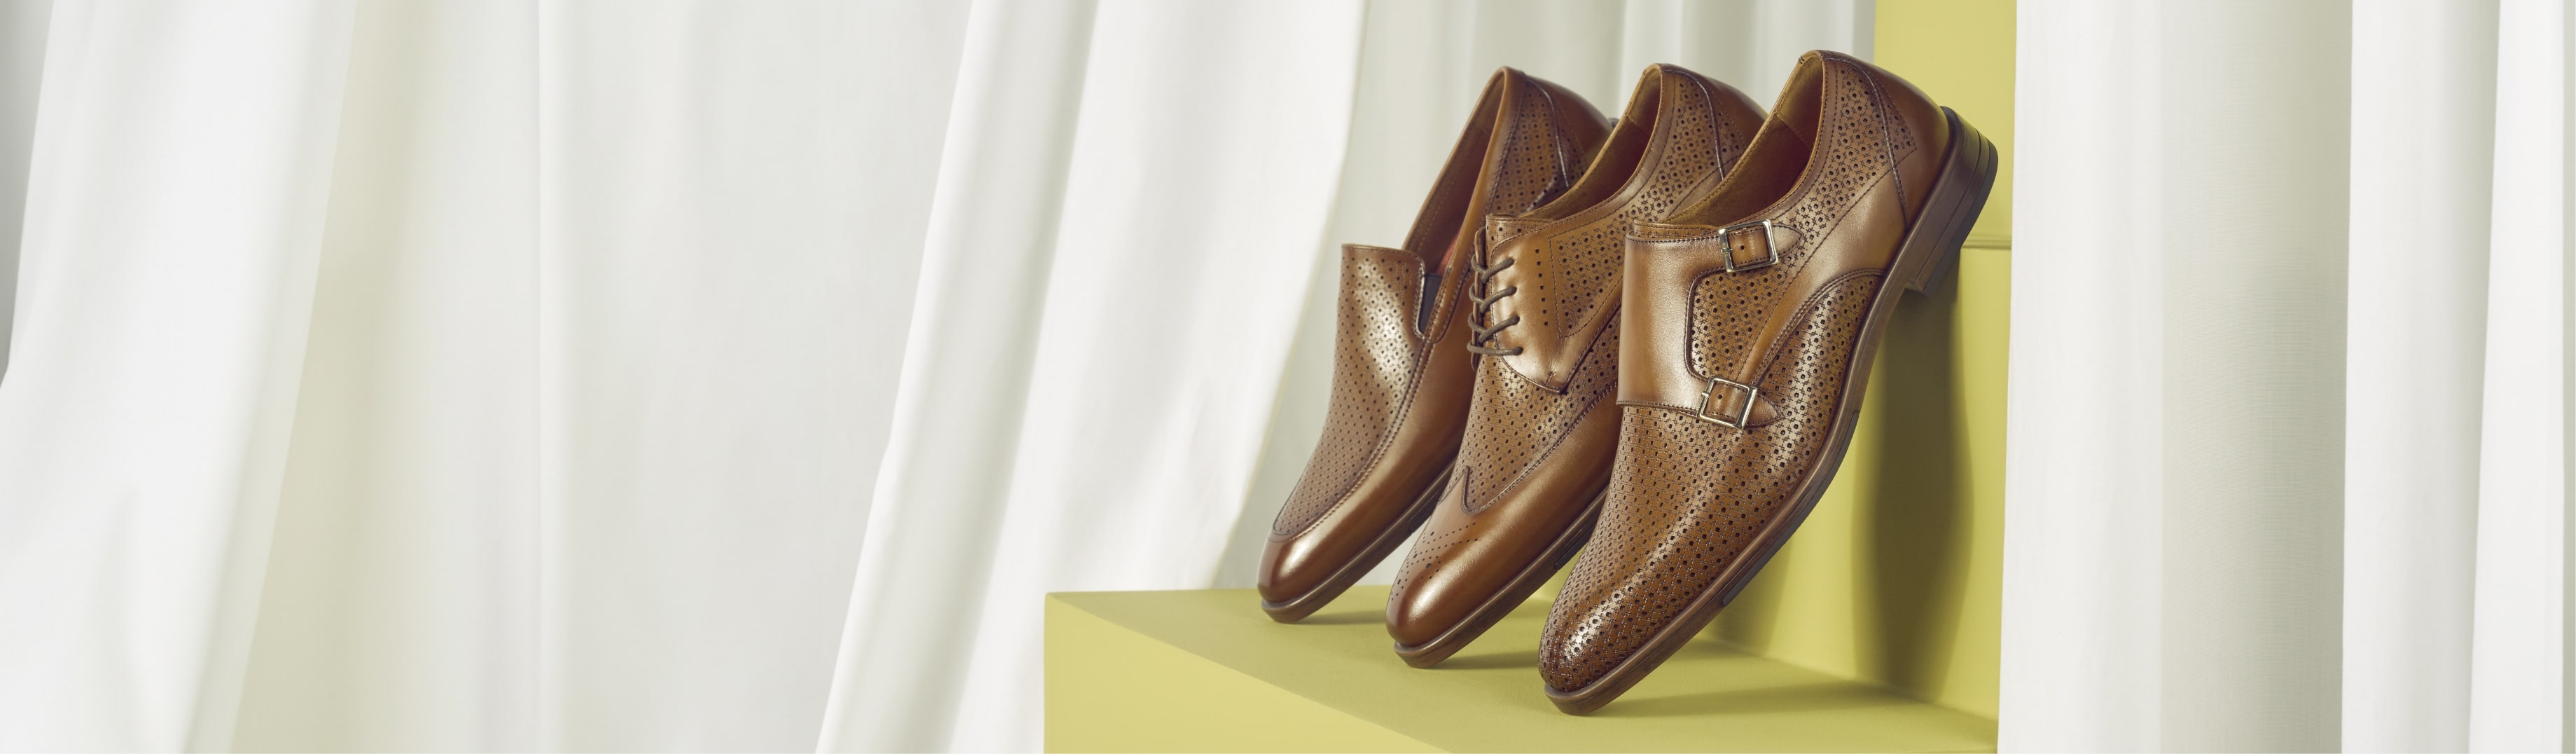 Click to shop the Stacy Adams A series. Image features a variety of dress shoes. 